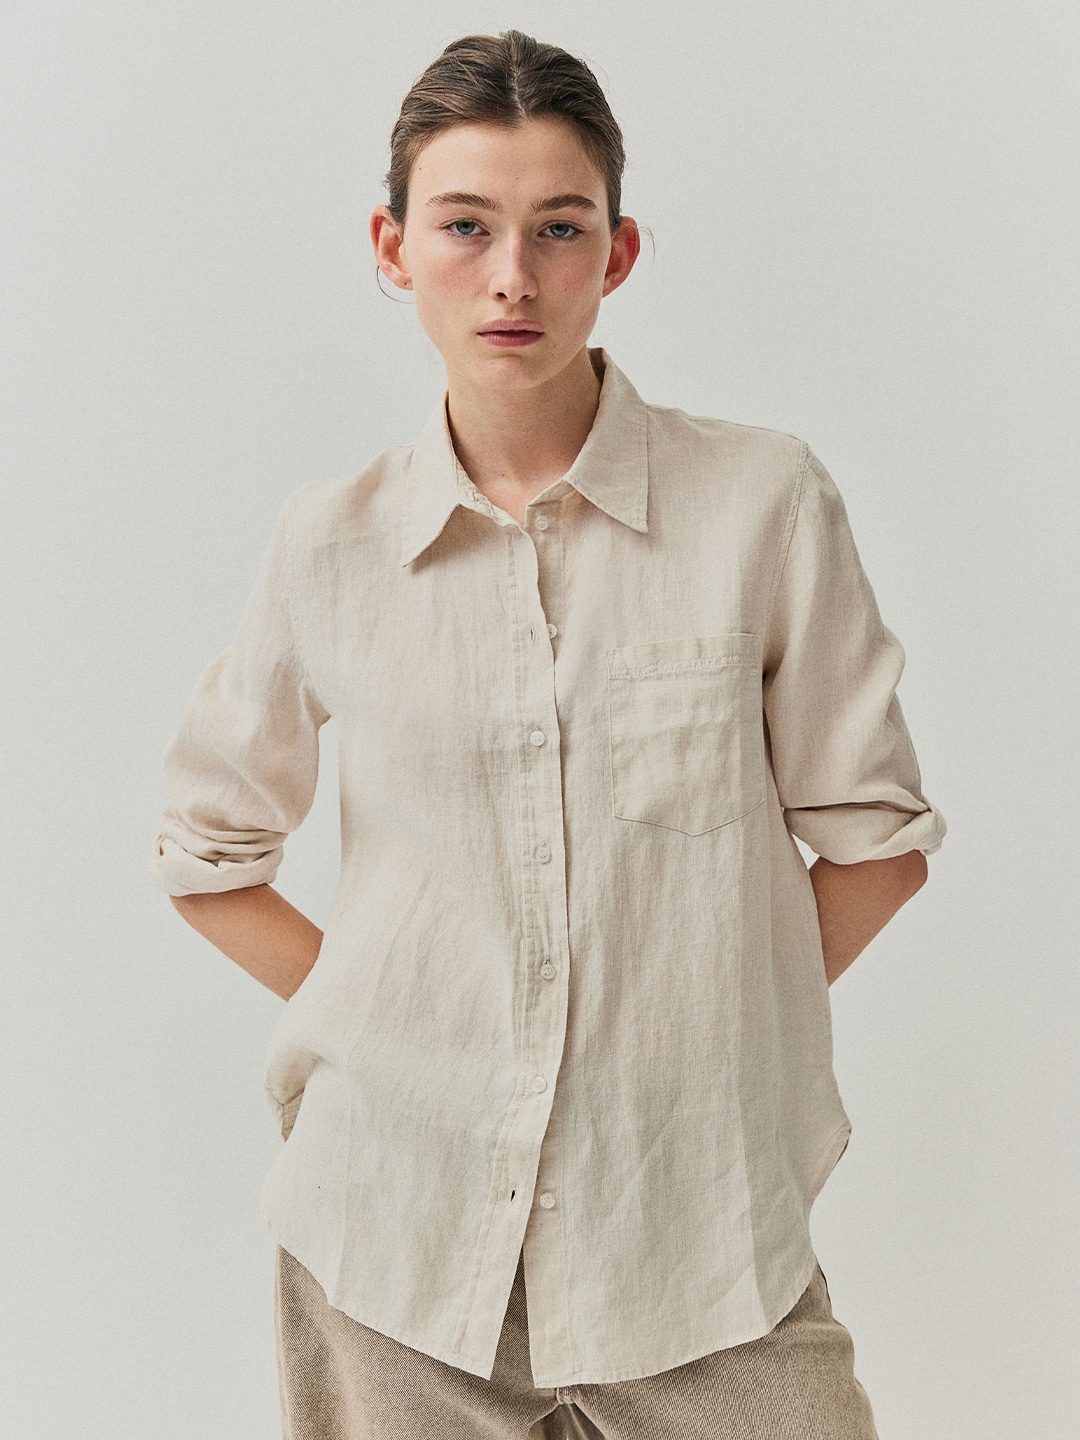 H&M Long Sleeves Linen Shirt Price in India